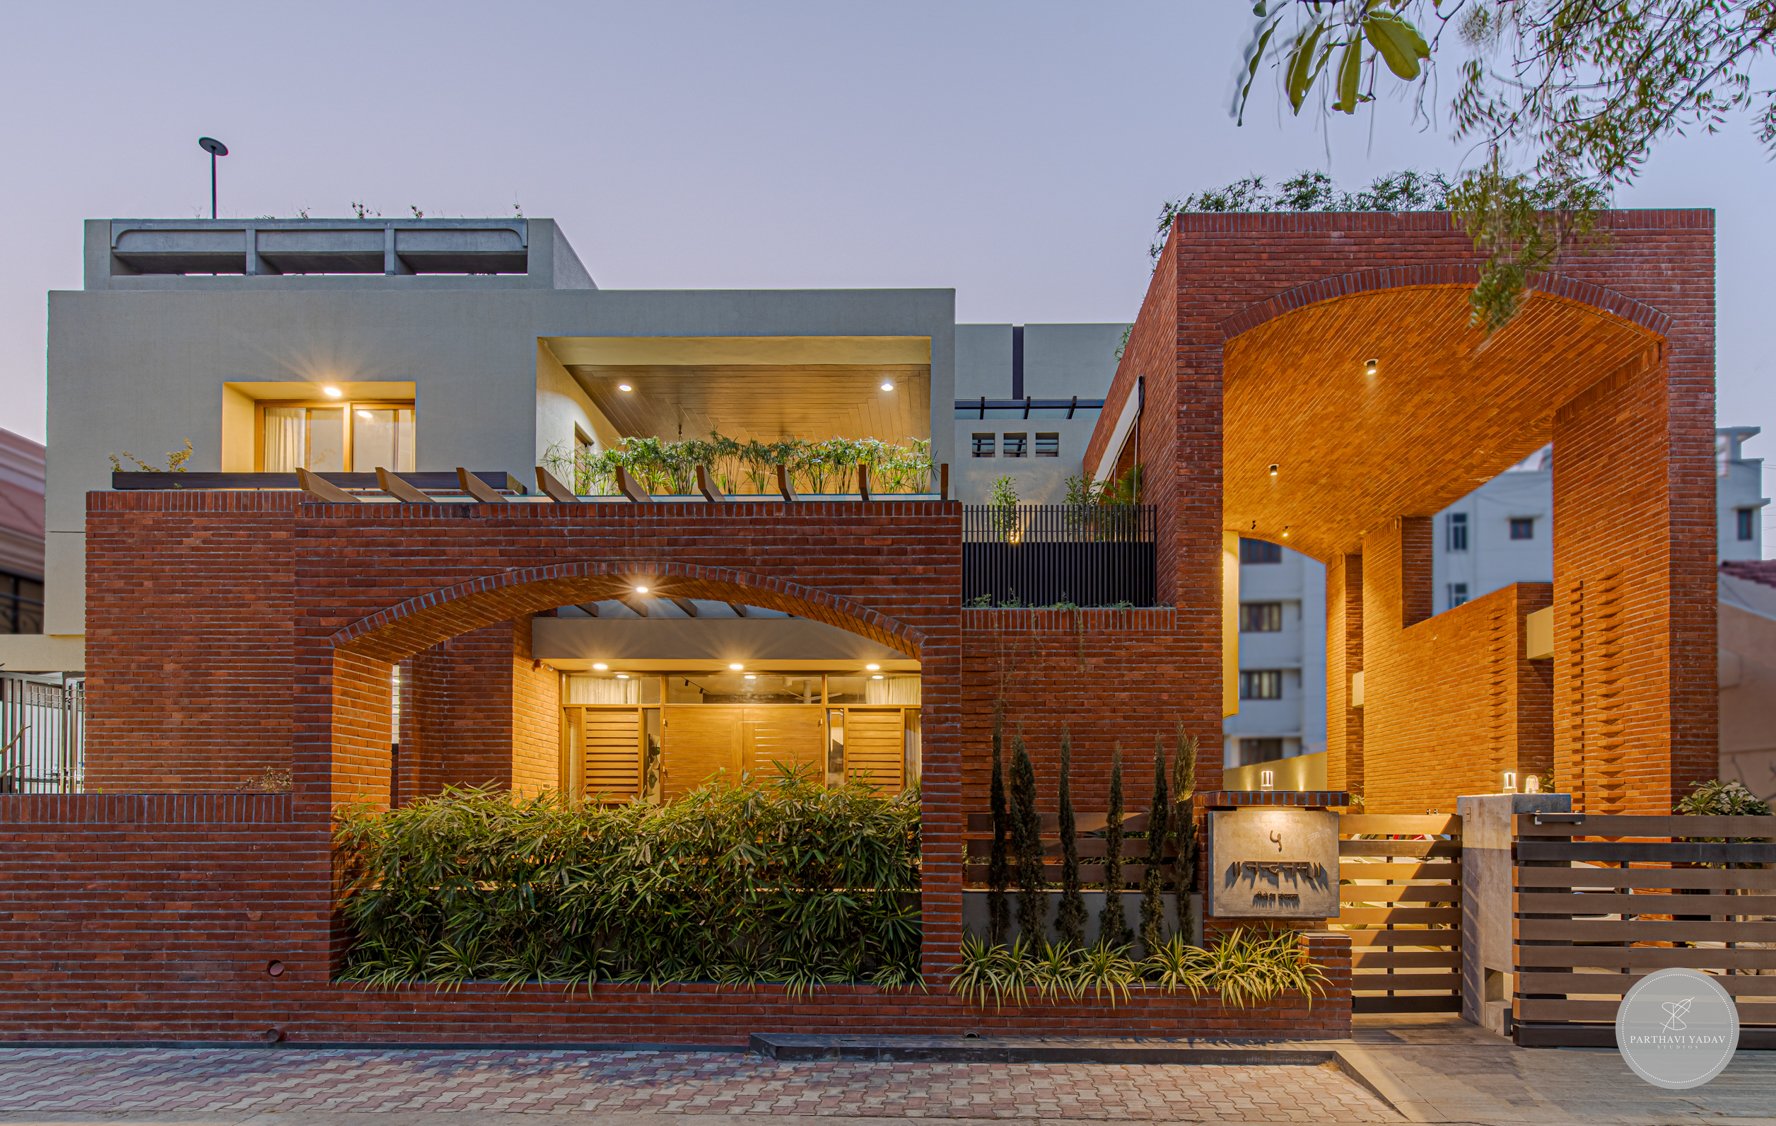 best interior photographer in pune bangalore - architectural photograph of a bungalow with exposed bricks facade in the evening sunset light.jpg